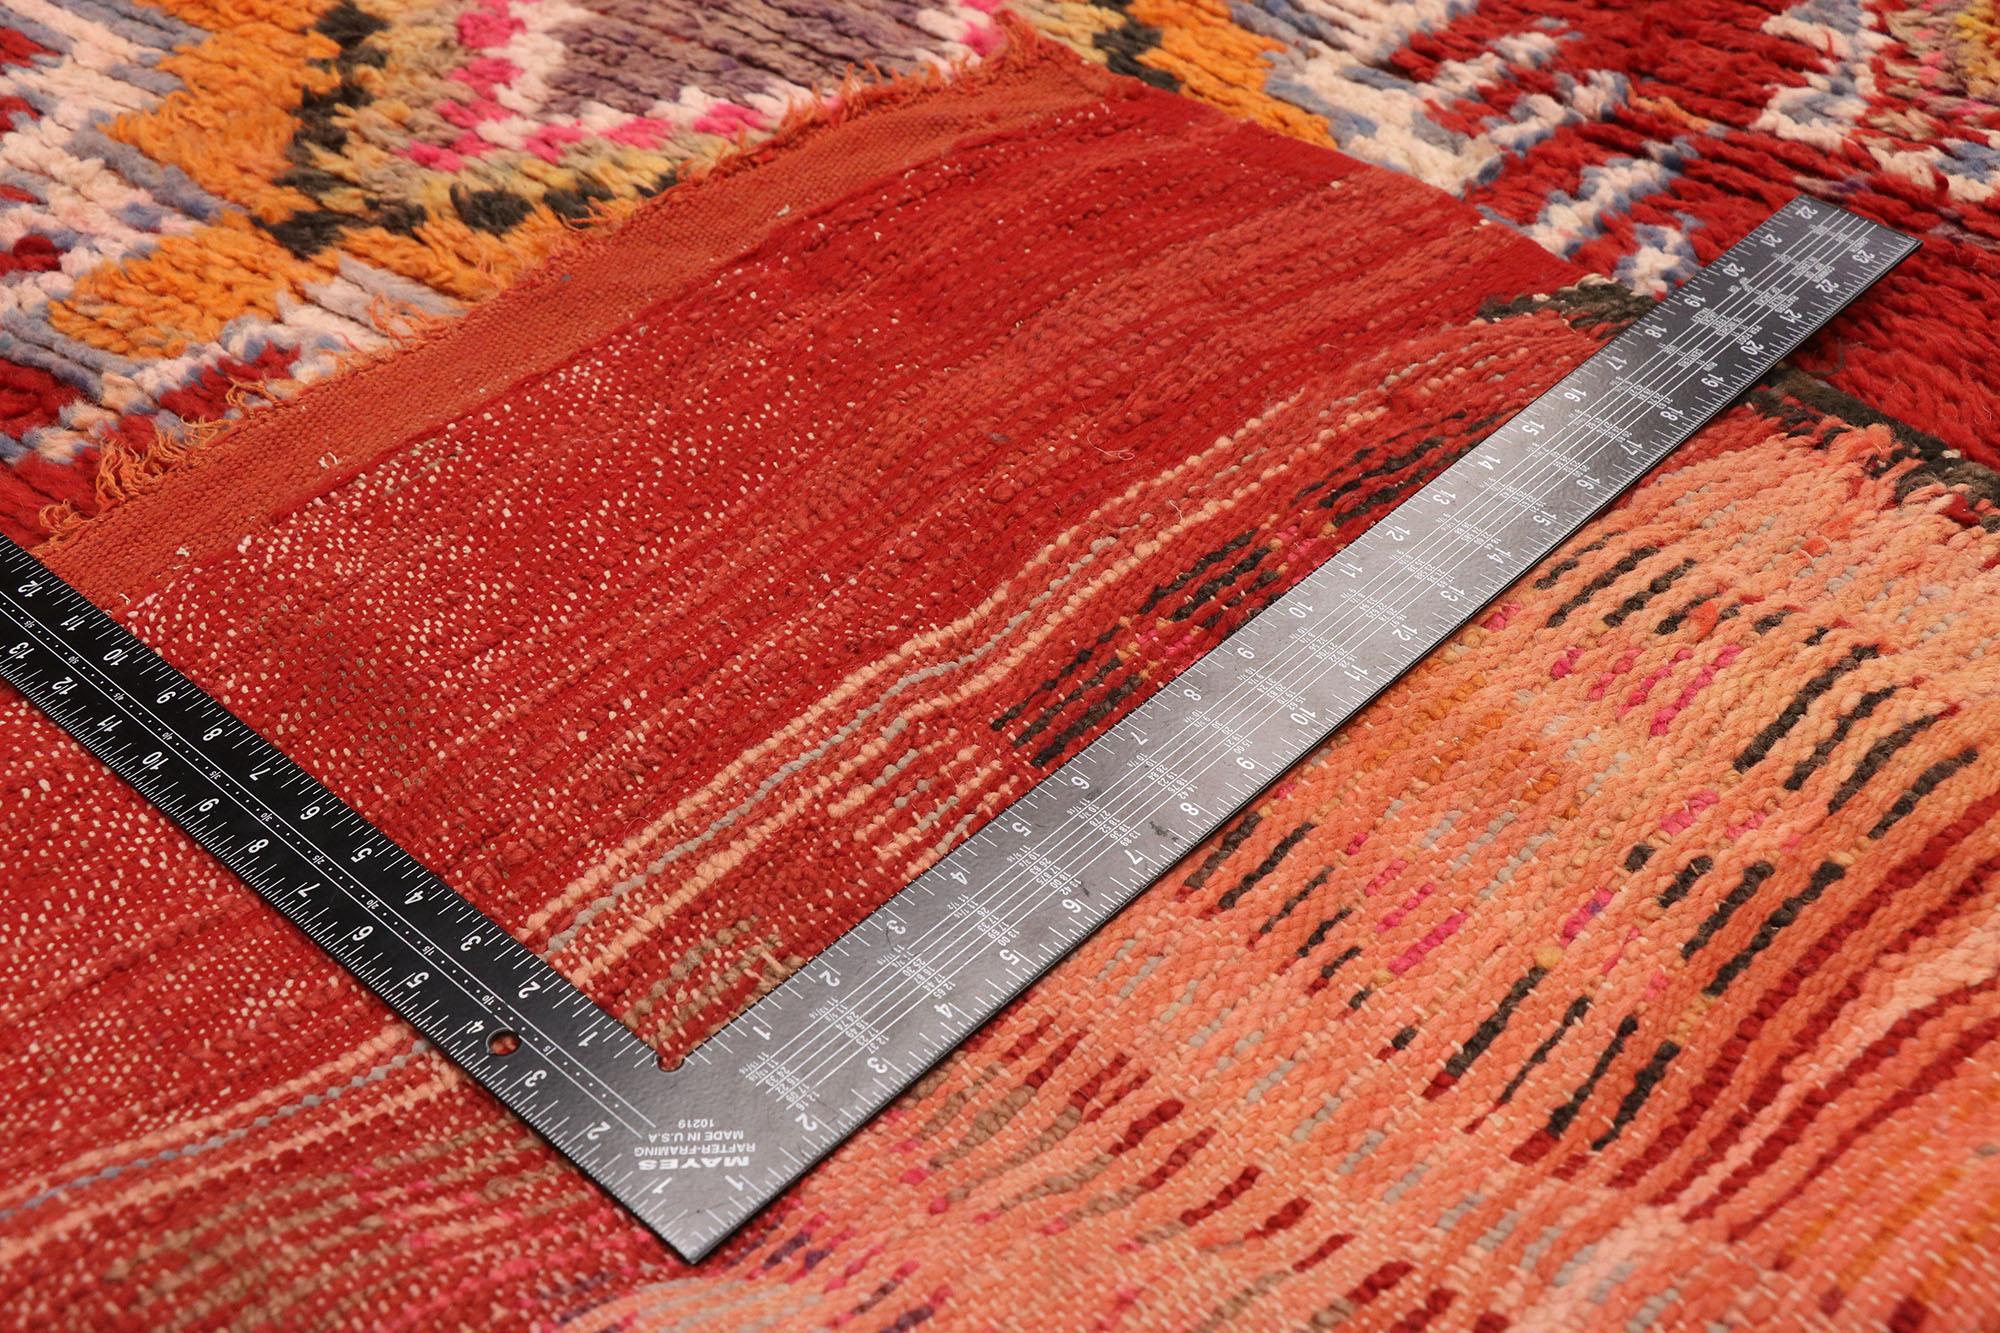 Vintage Berber Moroccan Rug with Boho Chic Tribal Artisan Style In Good Condition For Sale In Dallas, TX